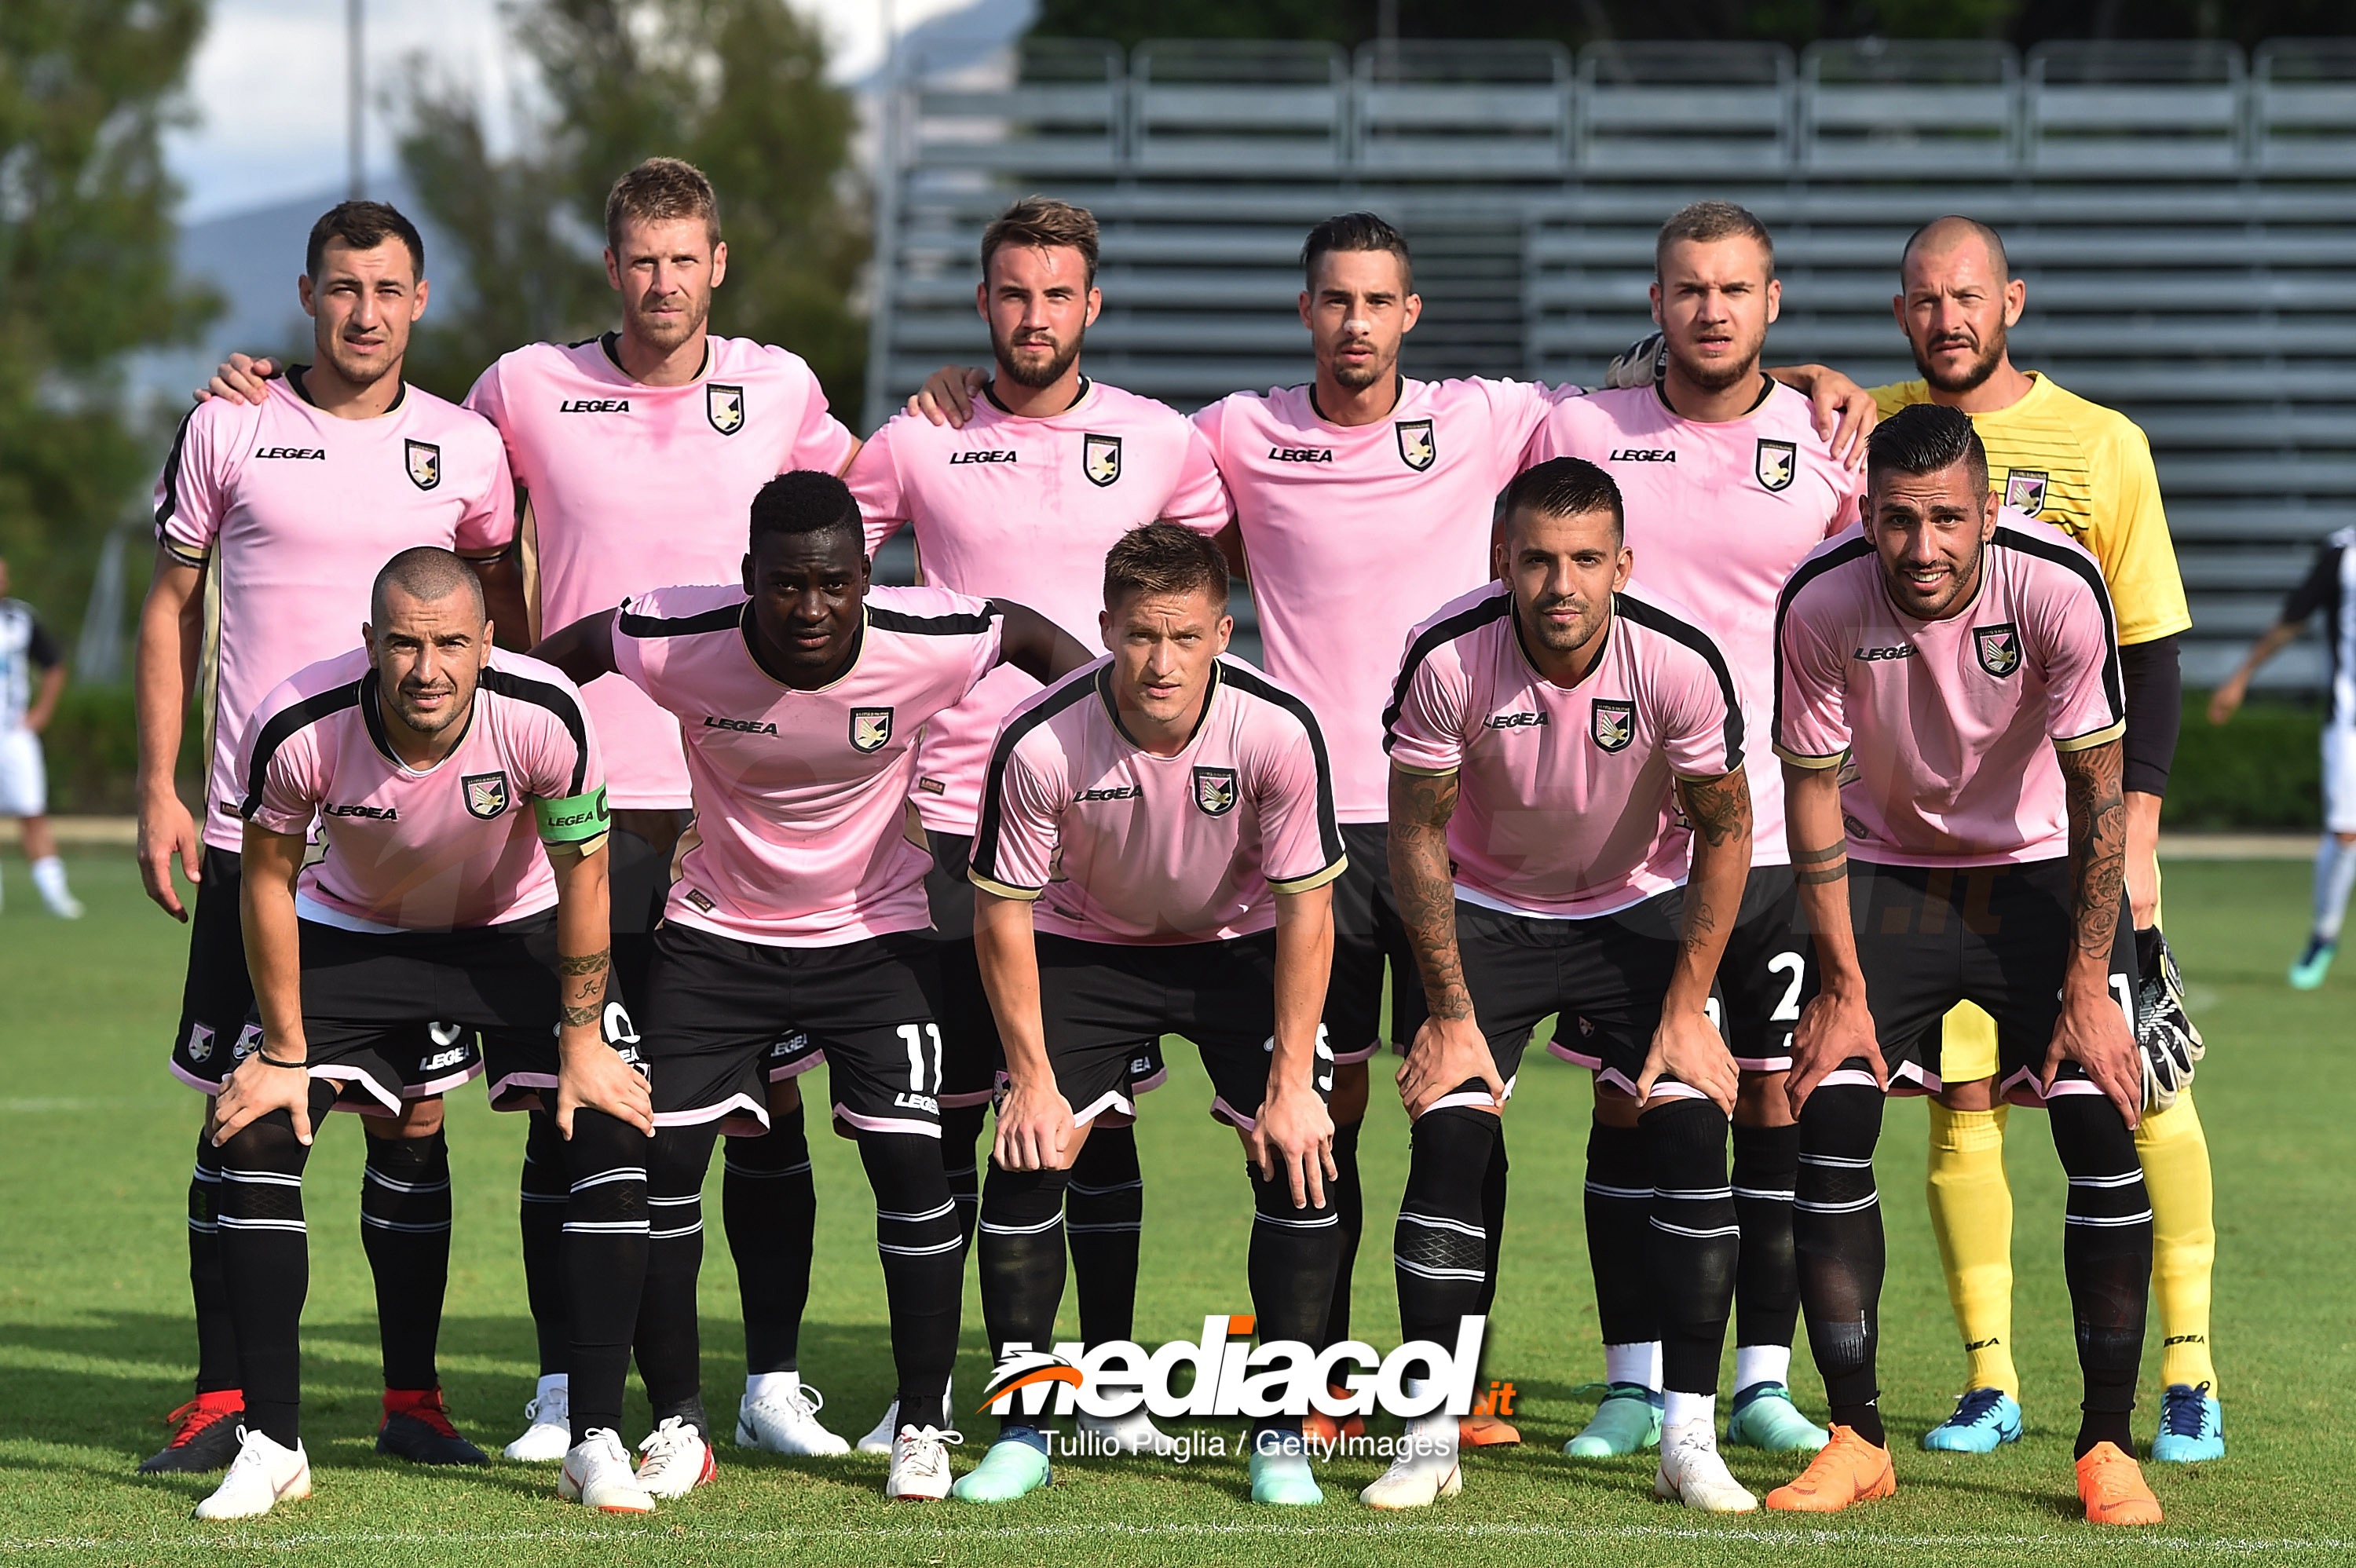 PALERMO, ITALY - AUGUST 18: Players of Palermo pose for a team shot during the pre-season friendly match between US Citta' di Palermo and Sicula Leonzio at Carmelo Onorato training center on August 18, 2018 in Palermo, Italy.  (Photo by Tullio M. Puglia/Getty Images)